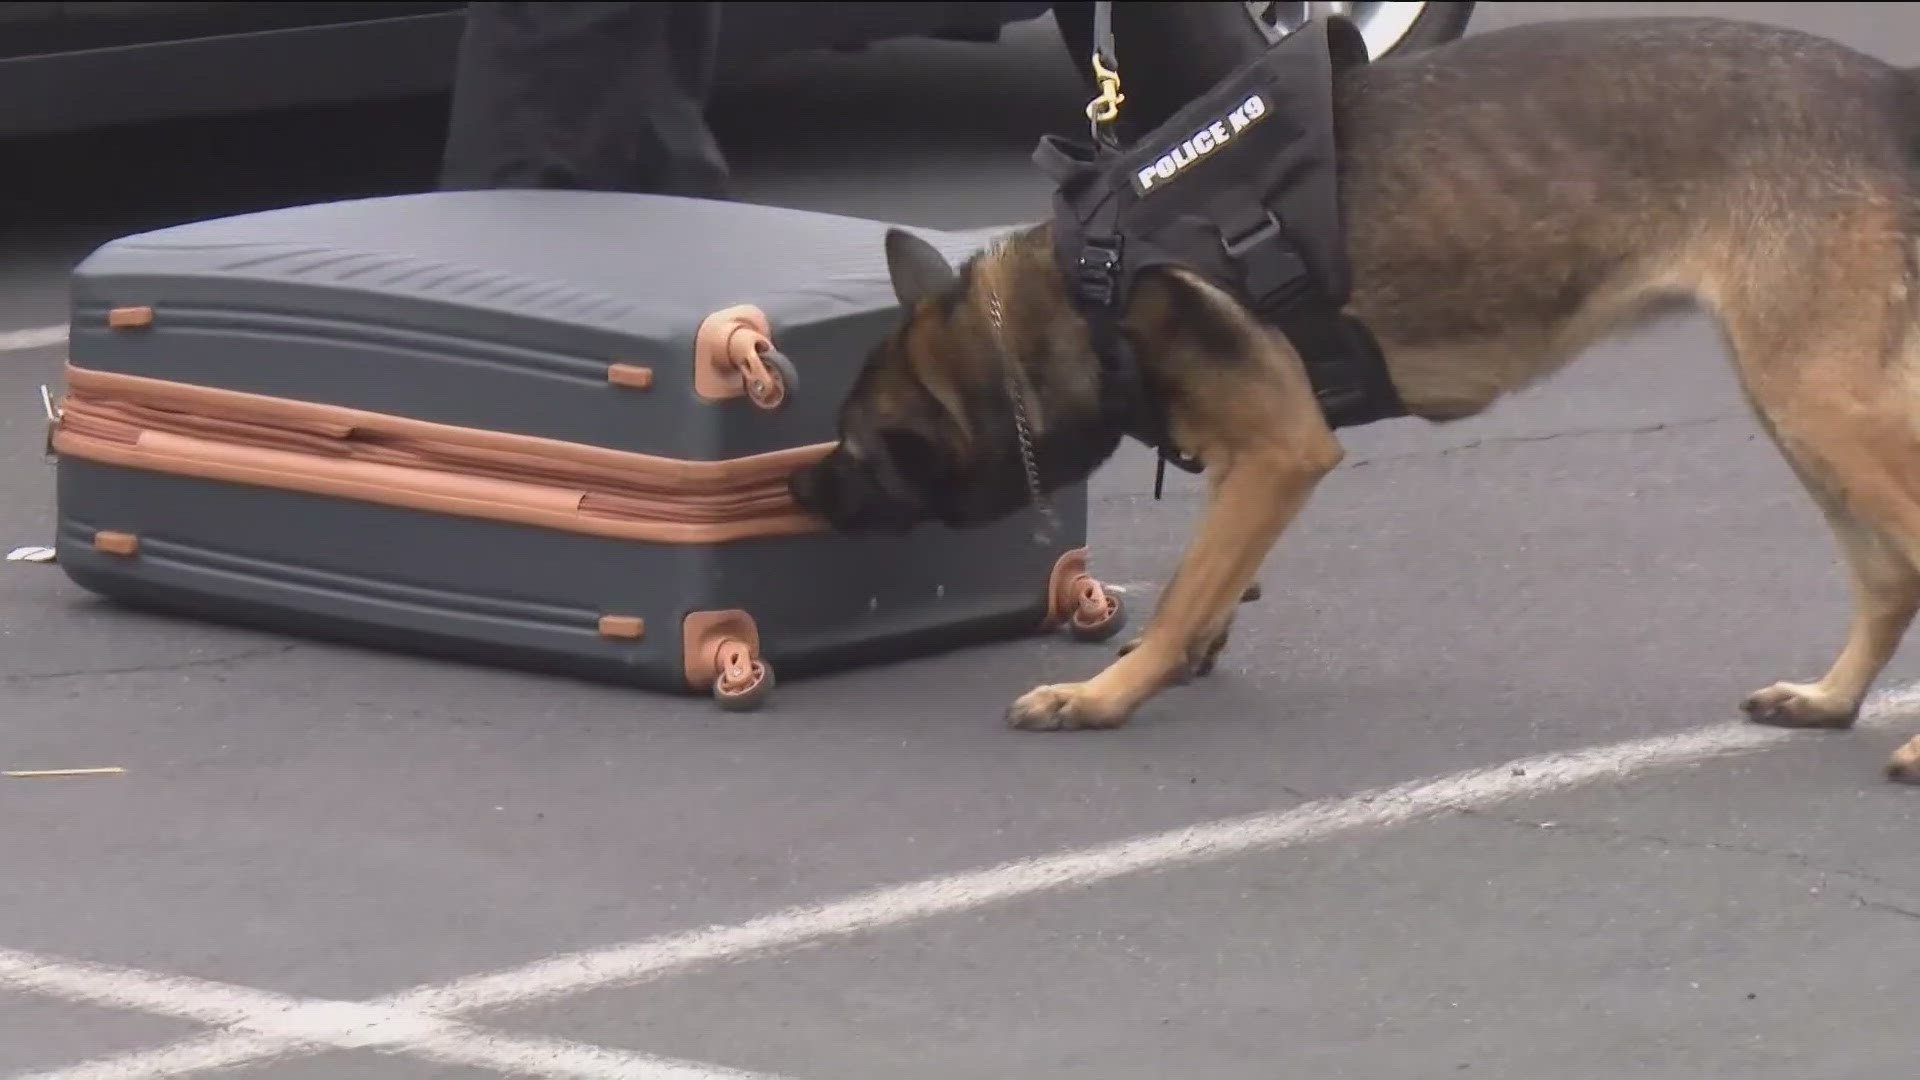 Assembly Bill 742 would limit the use of police dogs for arrests, apprehensions, and crowd control across California.